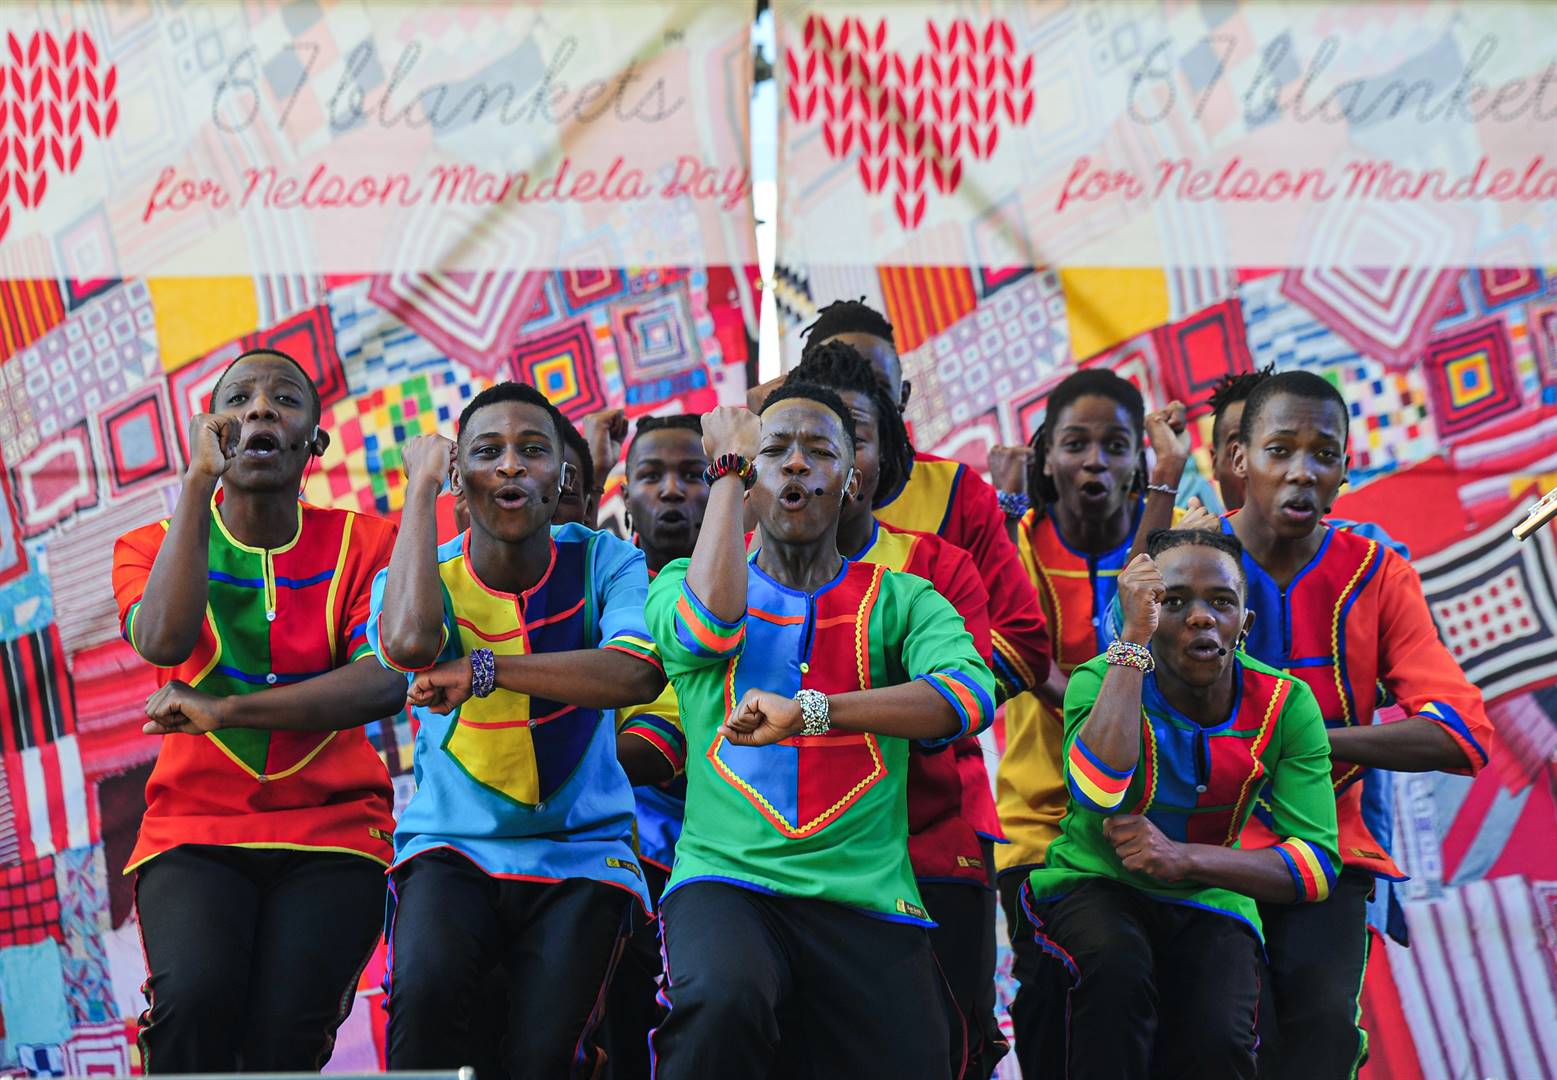 Mzansi Youth Choir performed a new song dedicated to the humanitarian organisation the Gift of the Givers, health workers and the 67 Blankets for Nelson Mandela Day organisation at the reveal event at Steyn City in Midrand. Photo: Rosetta Msimango